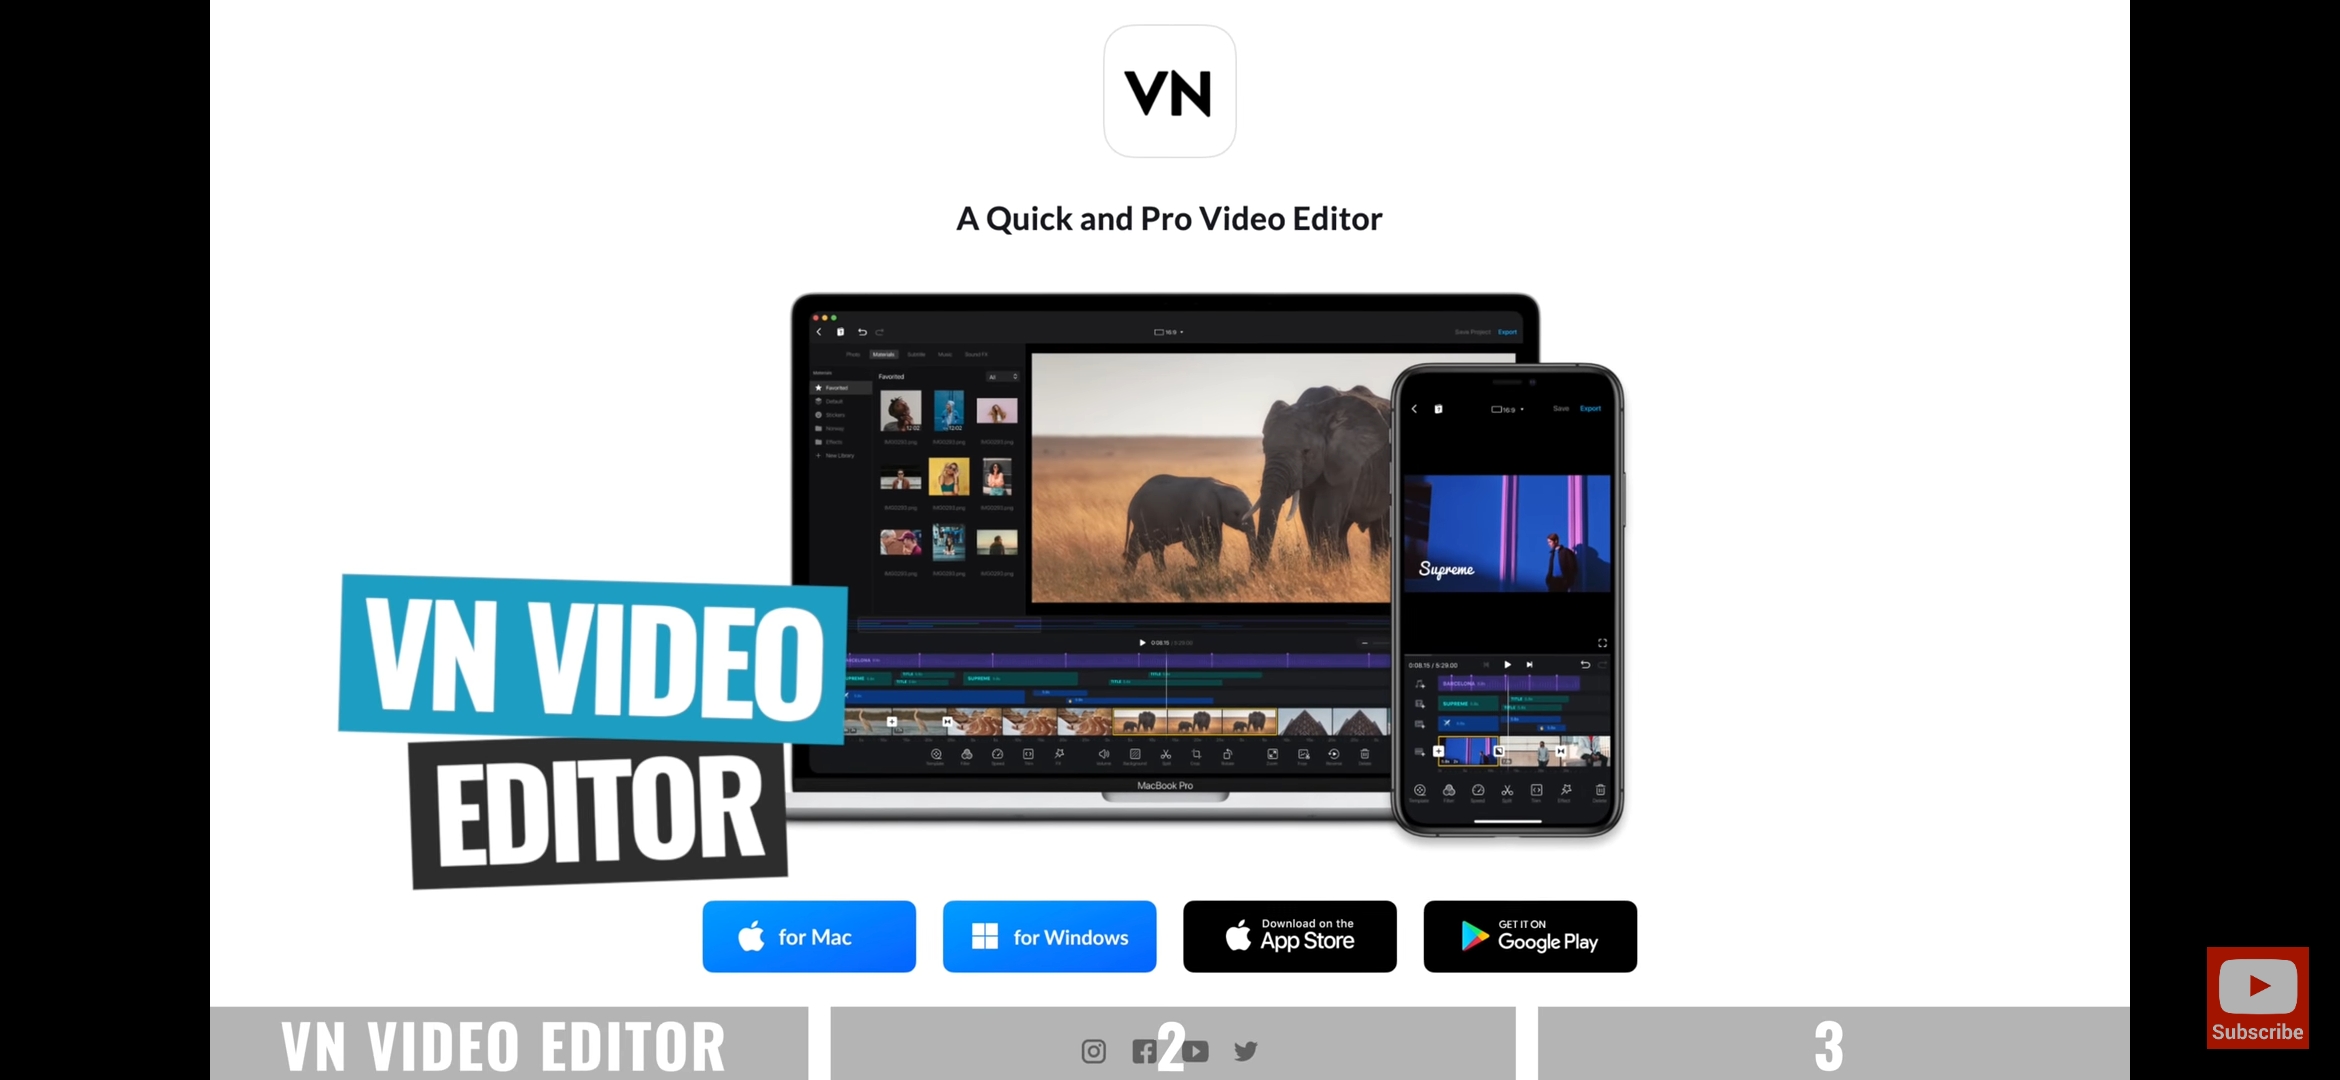 Vn video editor app for ios free download